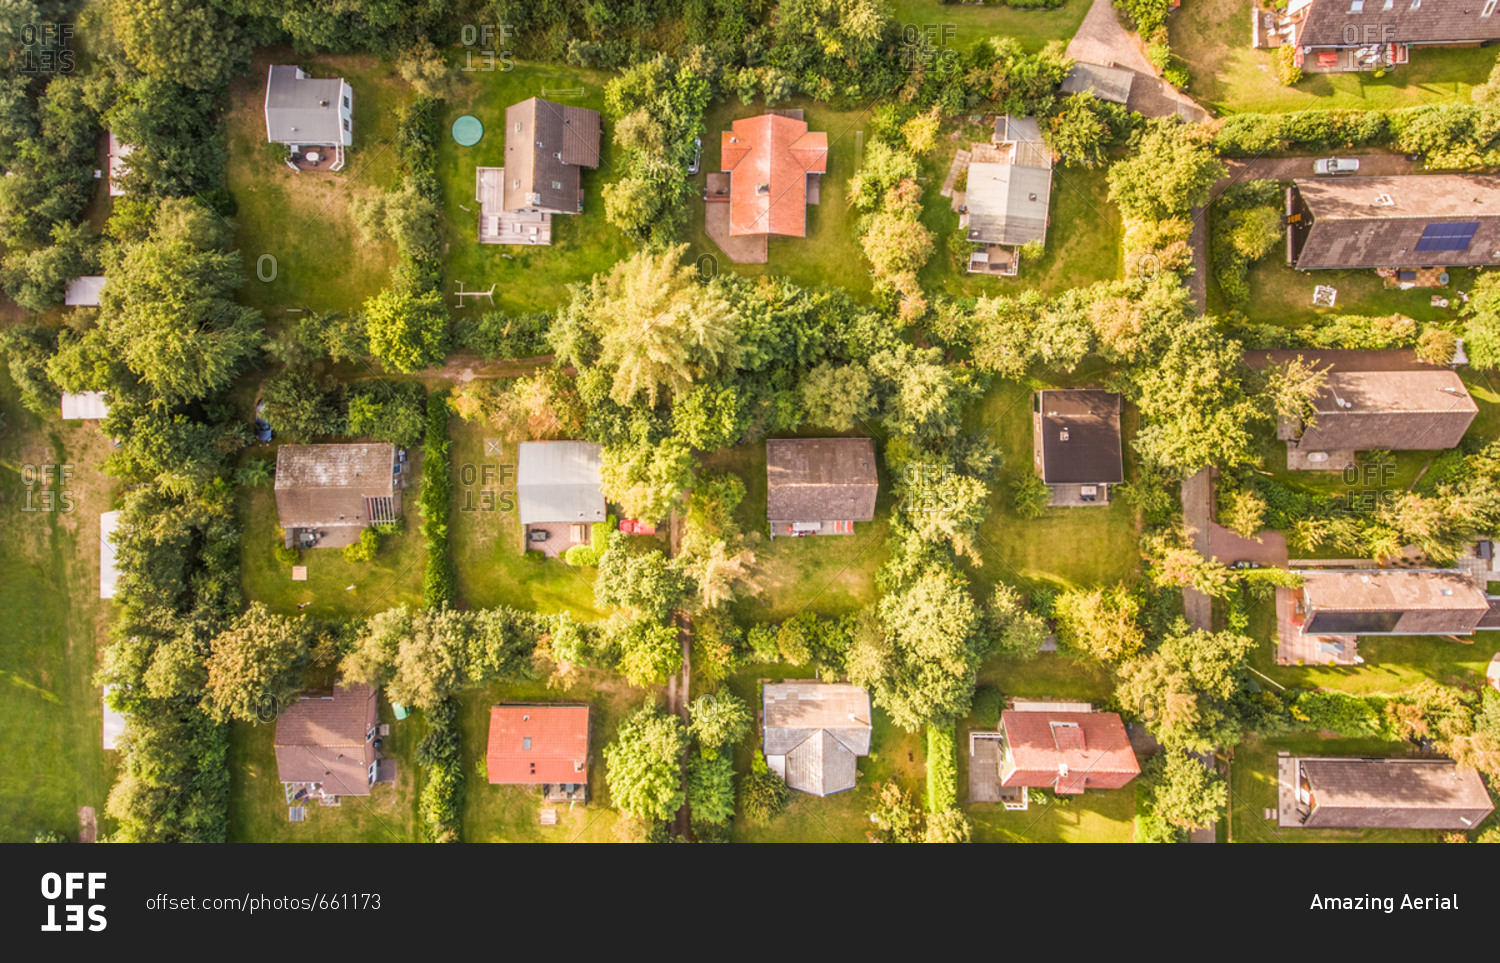 Aerial view of a neighborhood in The Netherlands.